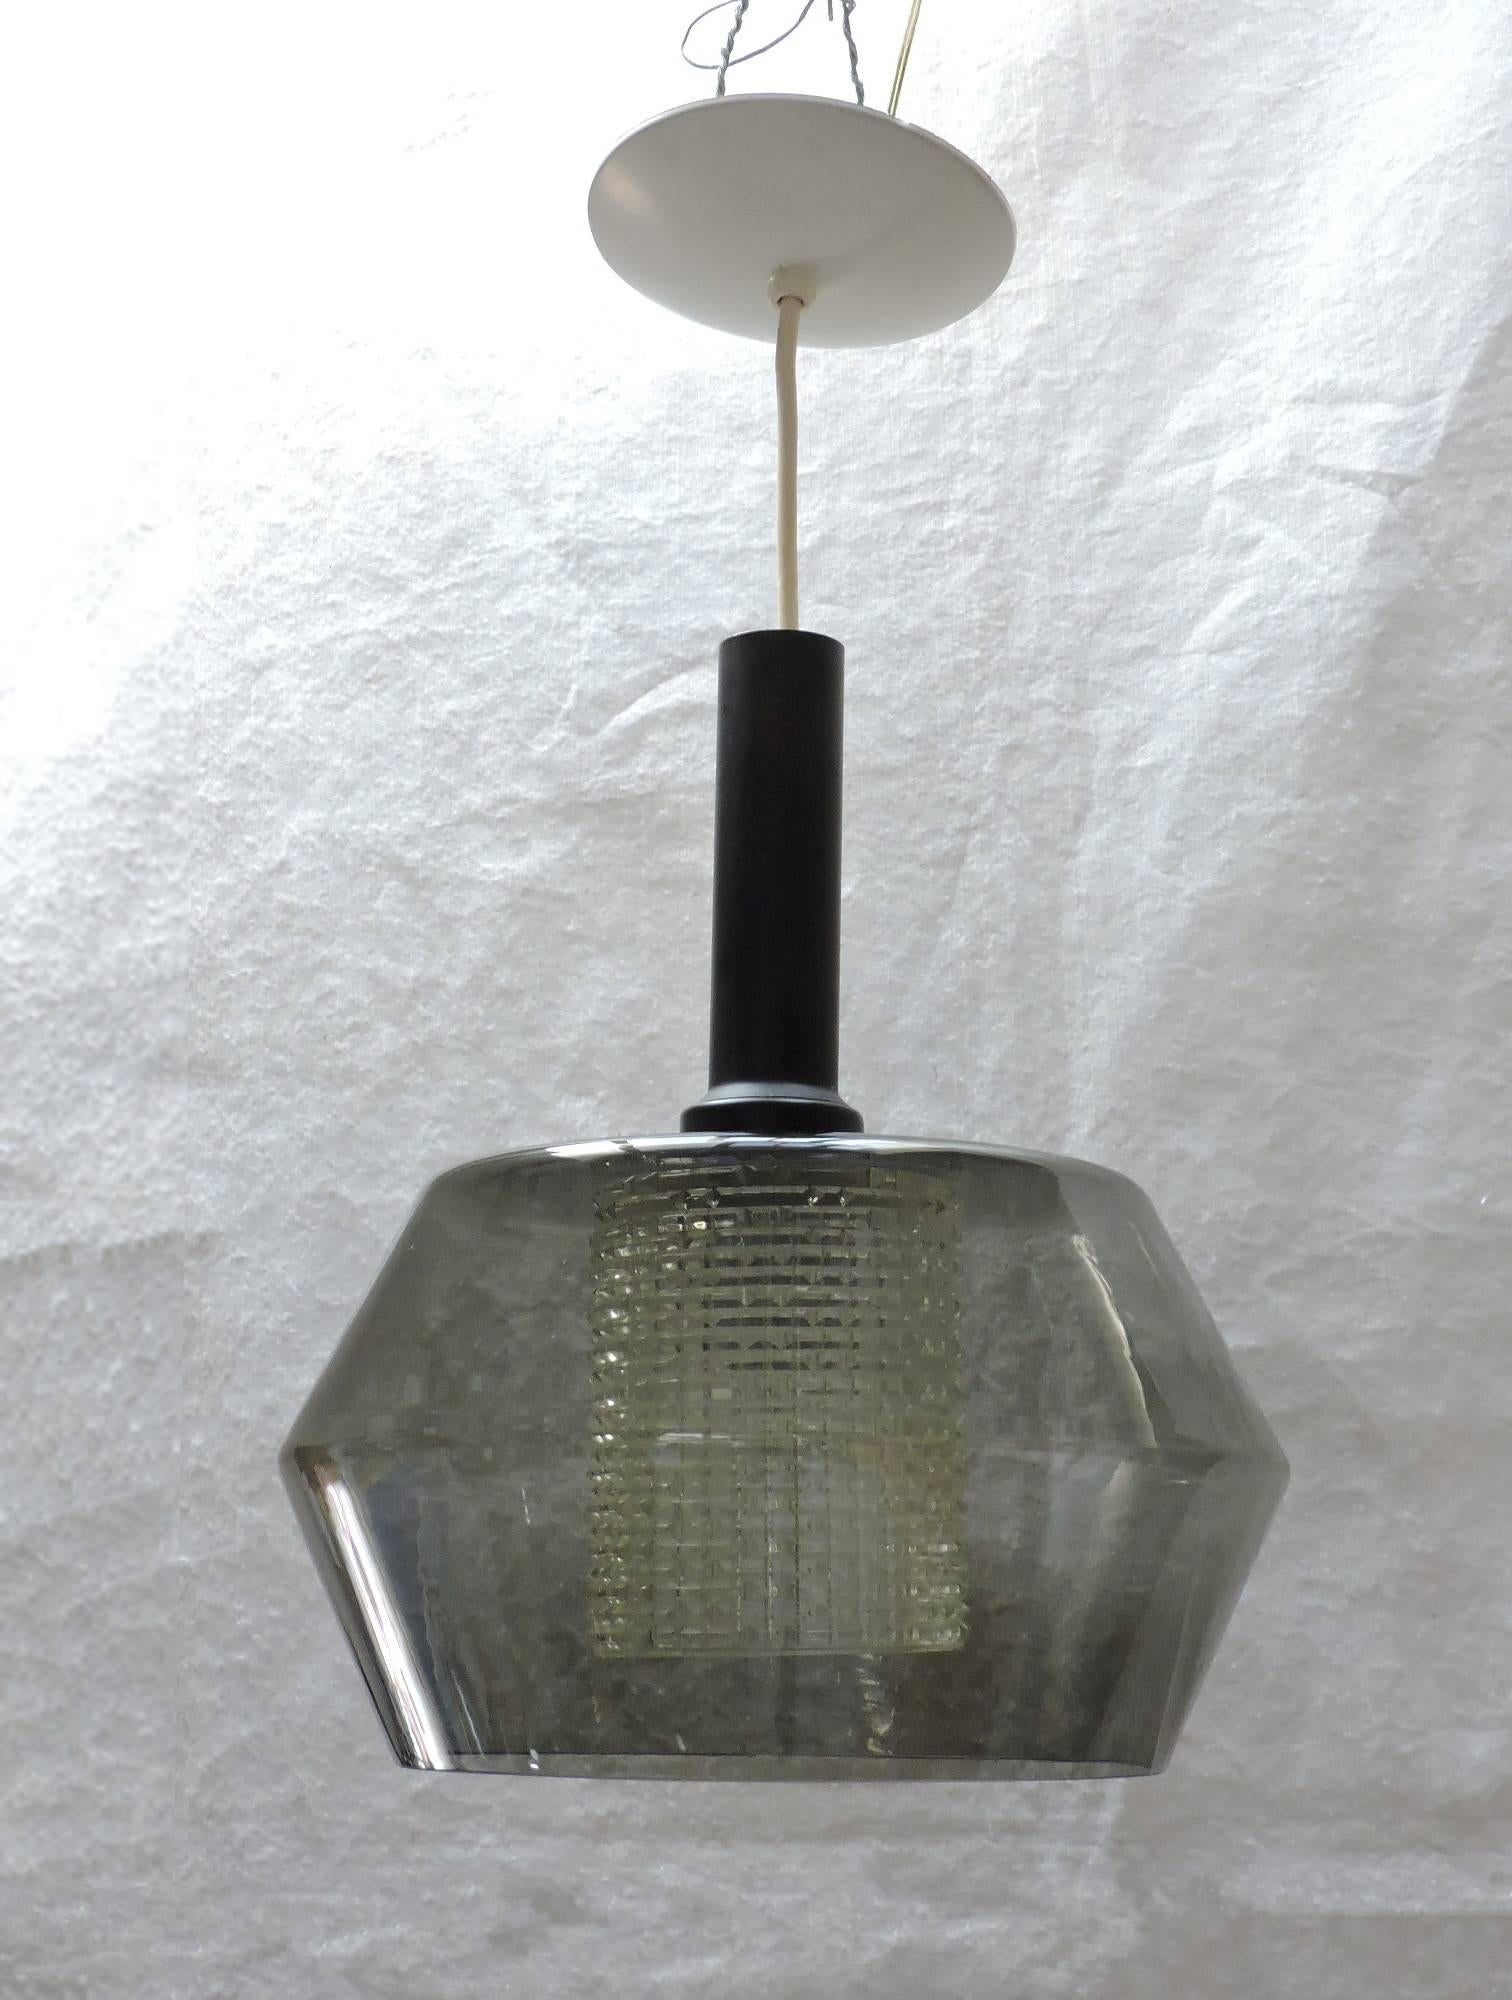 Handsome geometric Mid-Century pendant light made by high quality lighting manufacturer, Lightolier. This light has an interior clear textured glass shade surrounded by a larger smoked gray glass shade. This is very similar to light fixtures